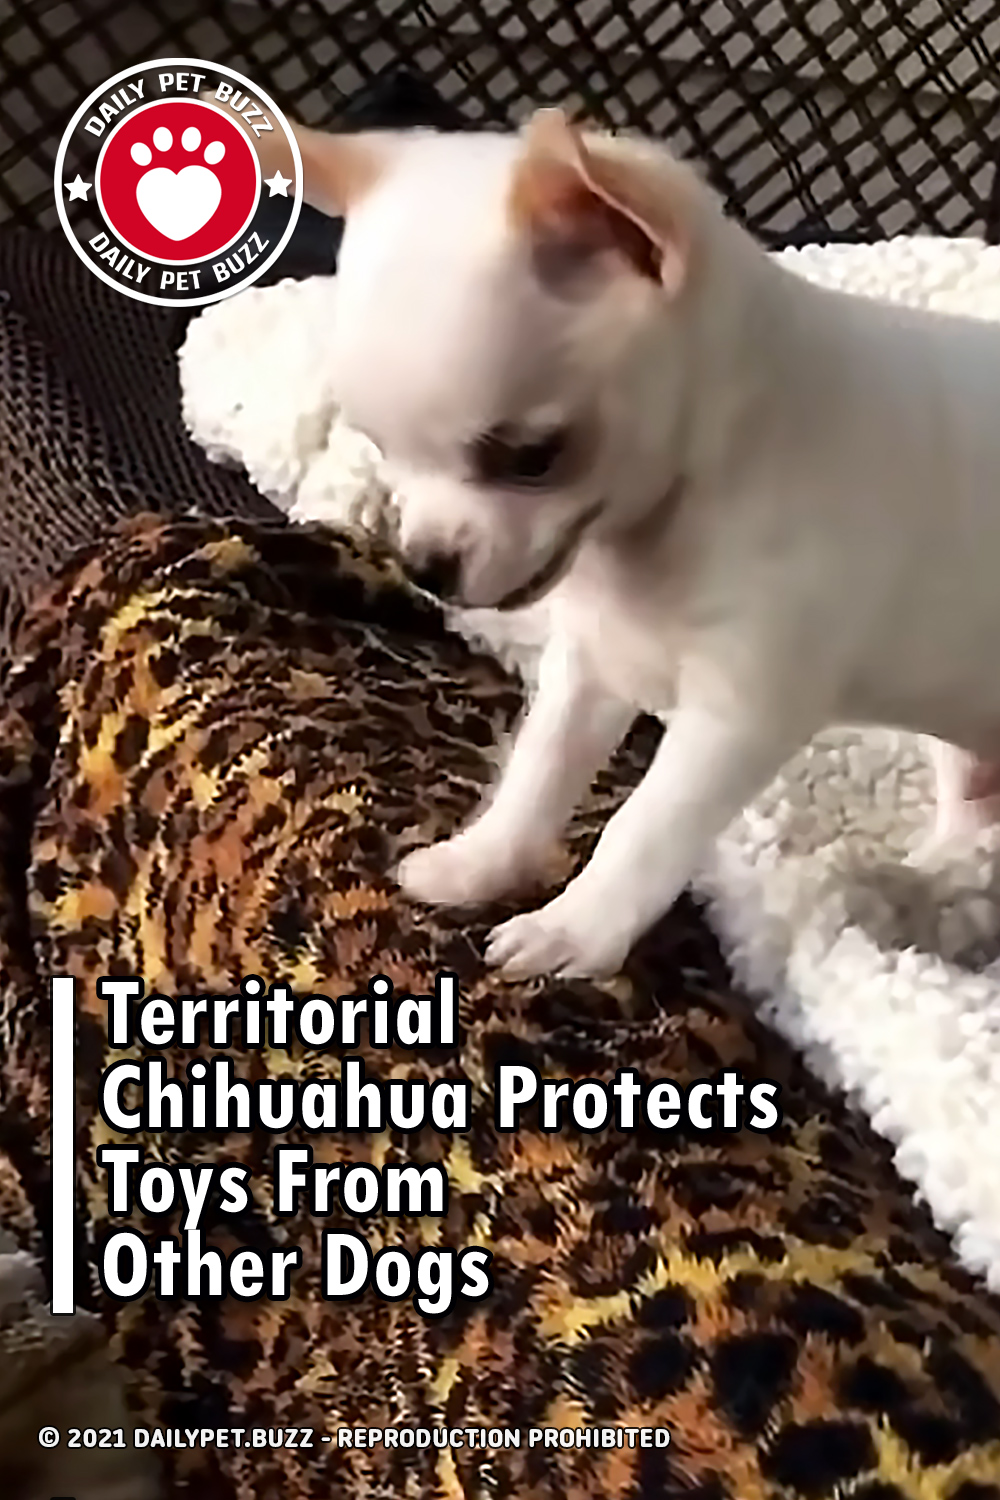 Territorial Chihuahua Protects Toys From Other Dogs